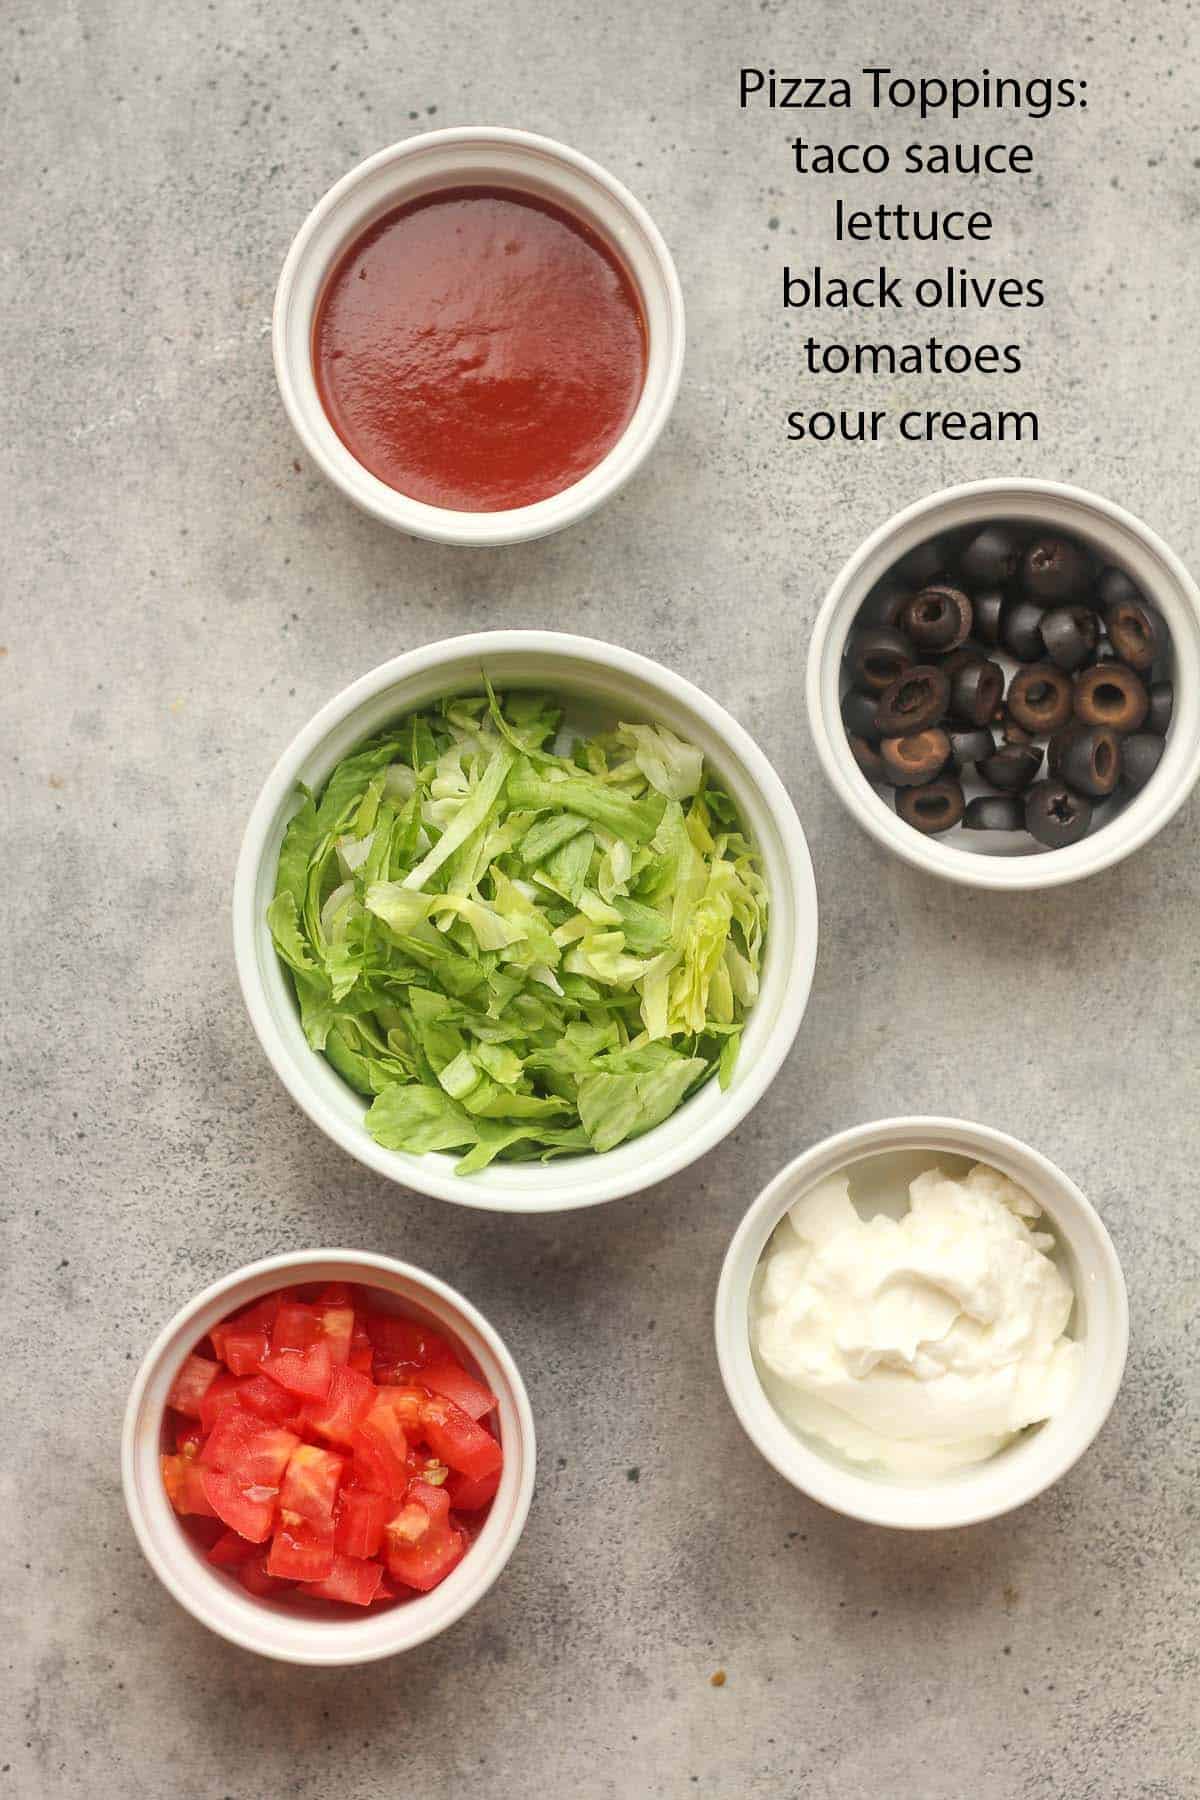 The pizza toppings in small bowls.